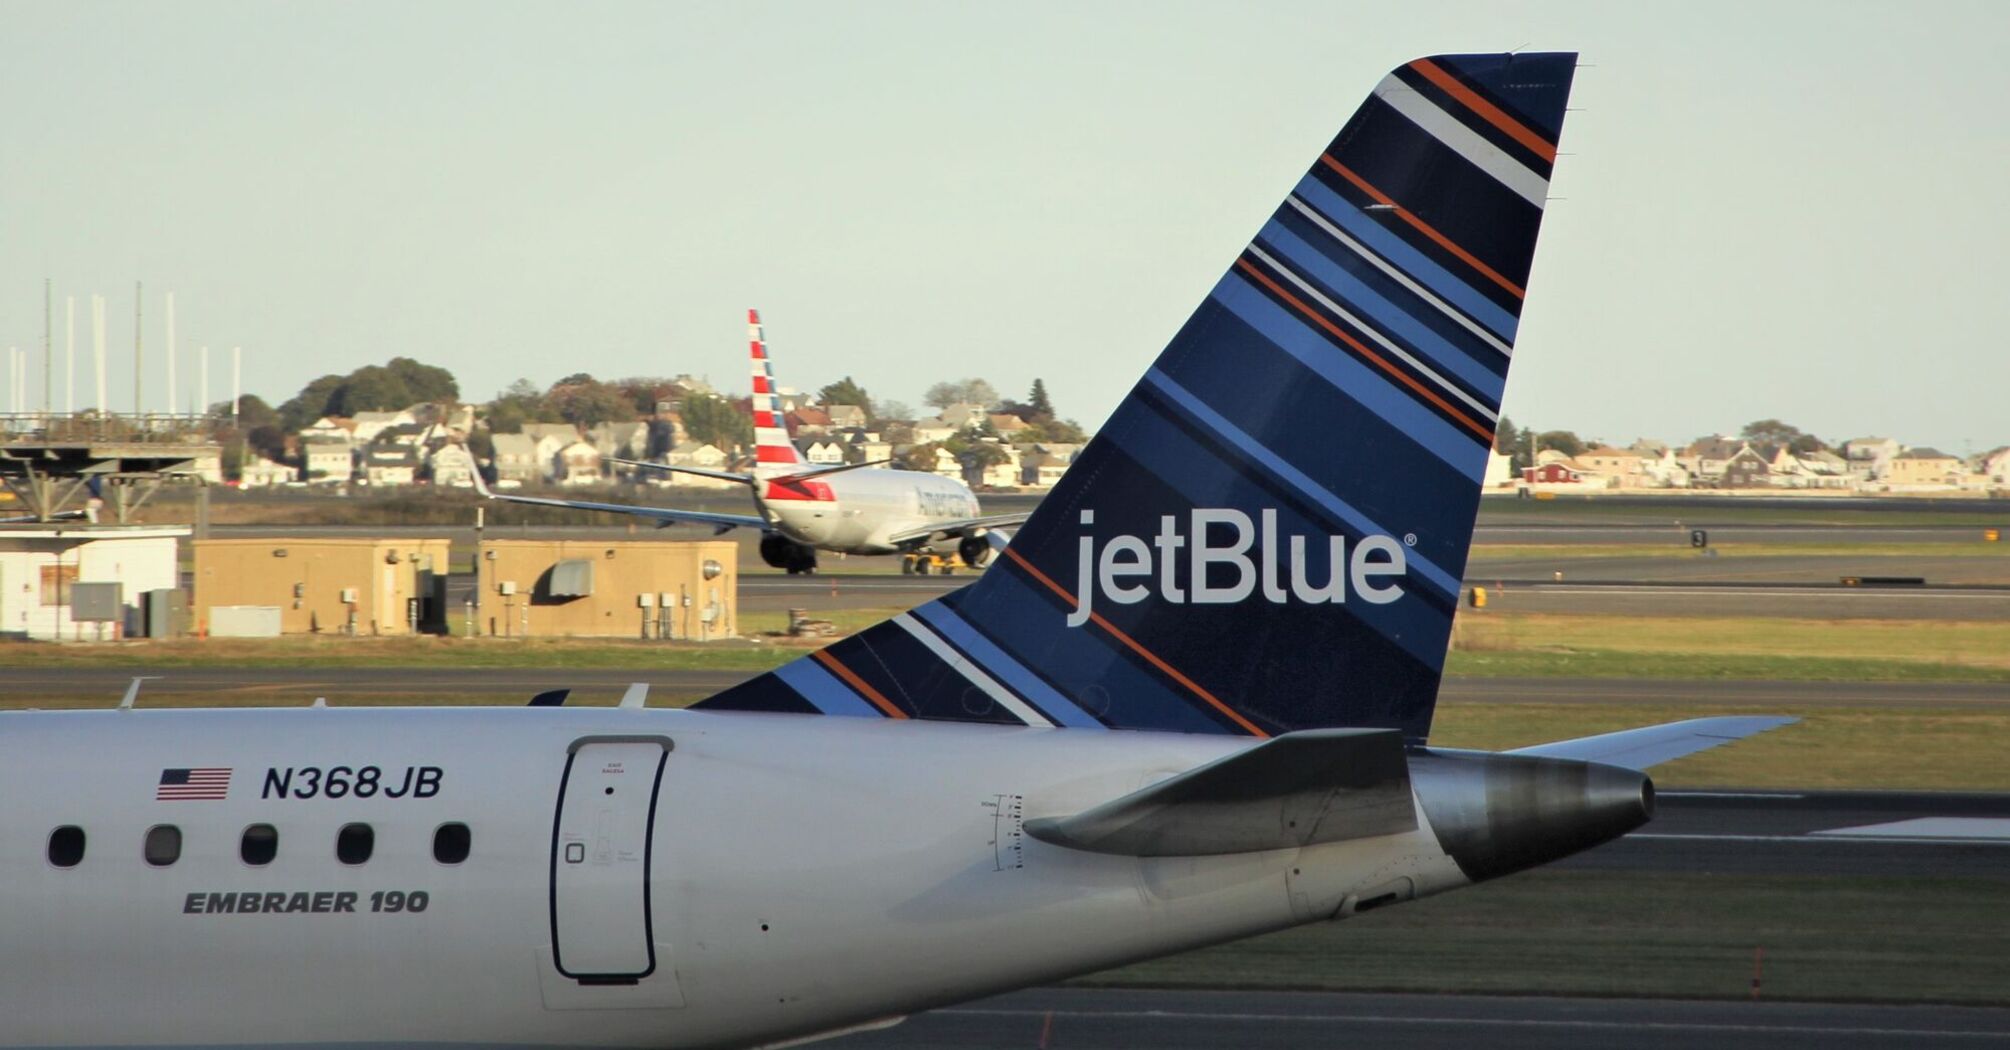 JetBlue Embraer 190 airplane tail with distinctive livery parked at an airport